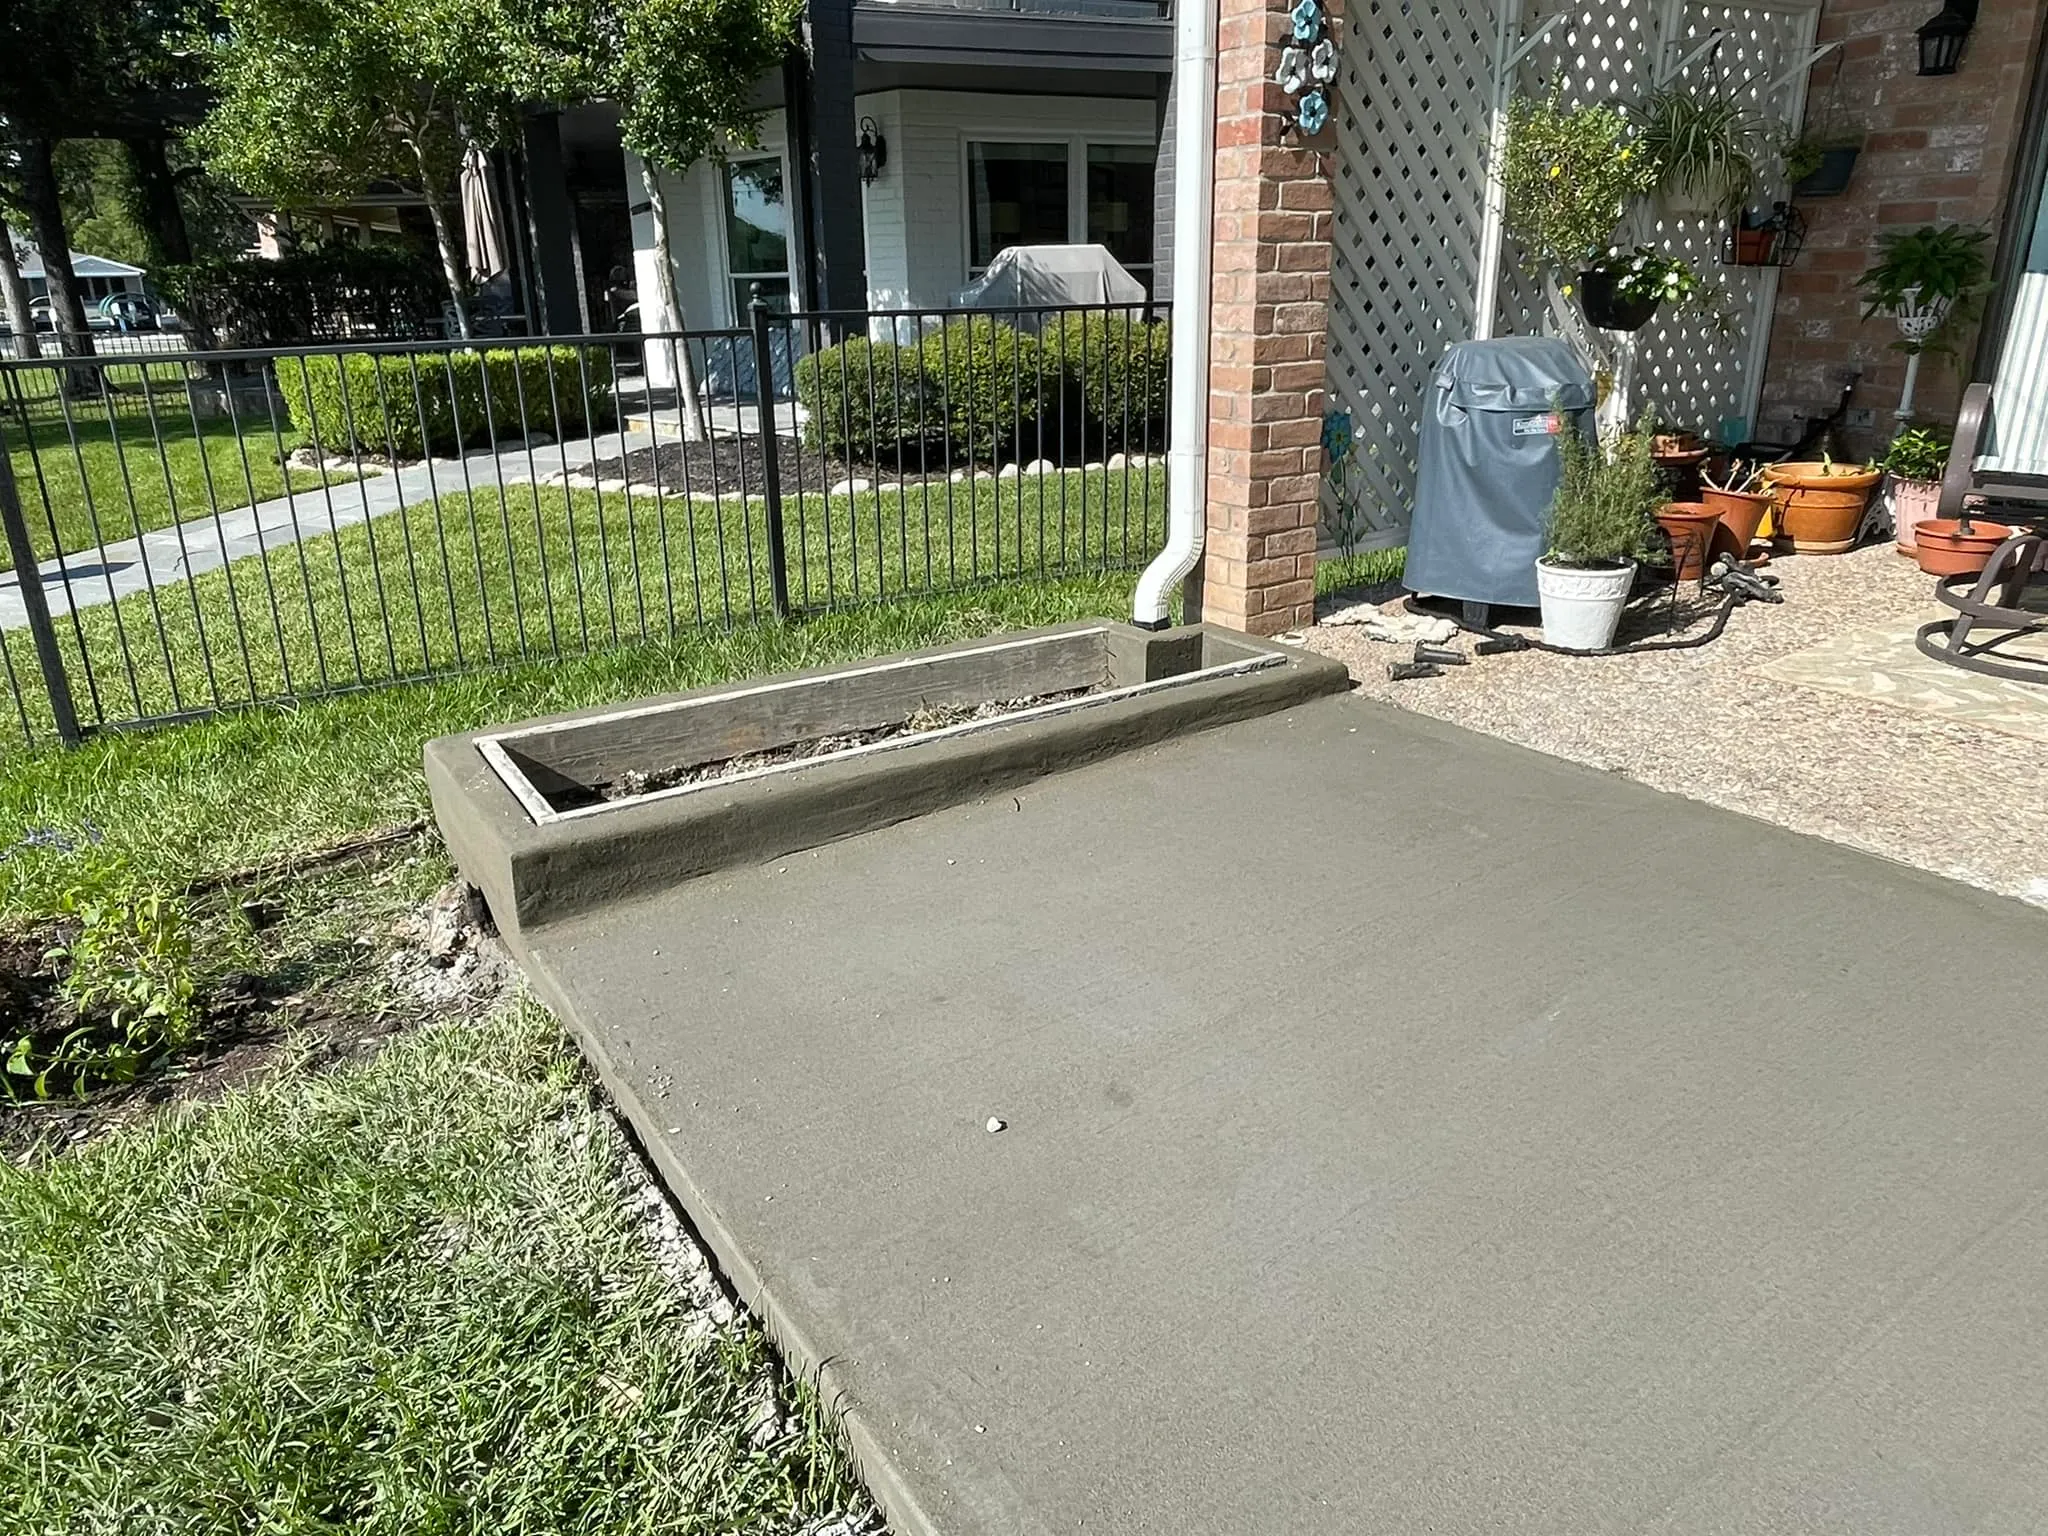 Concrete is the perfect material for a variety of construction and remodeling projects. It is strong, durable, and can be molded into any shape or size. Our concrete service can help you create a beautiful and lasting addition to your home. for Villa Concrete in The Woodlands, TX